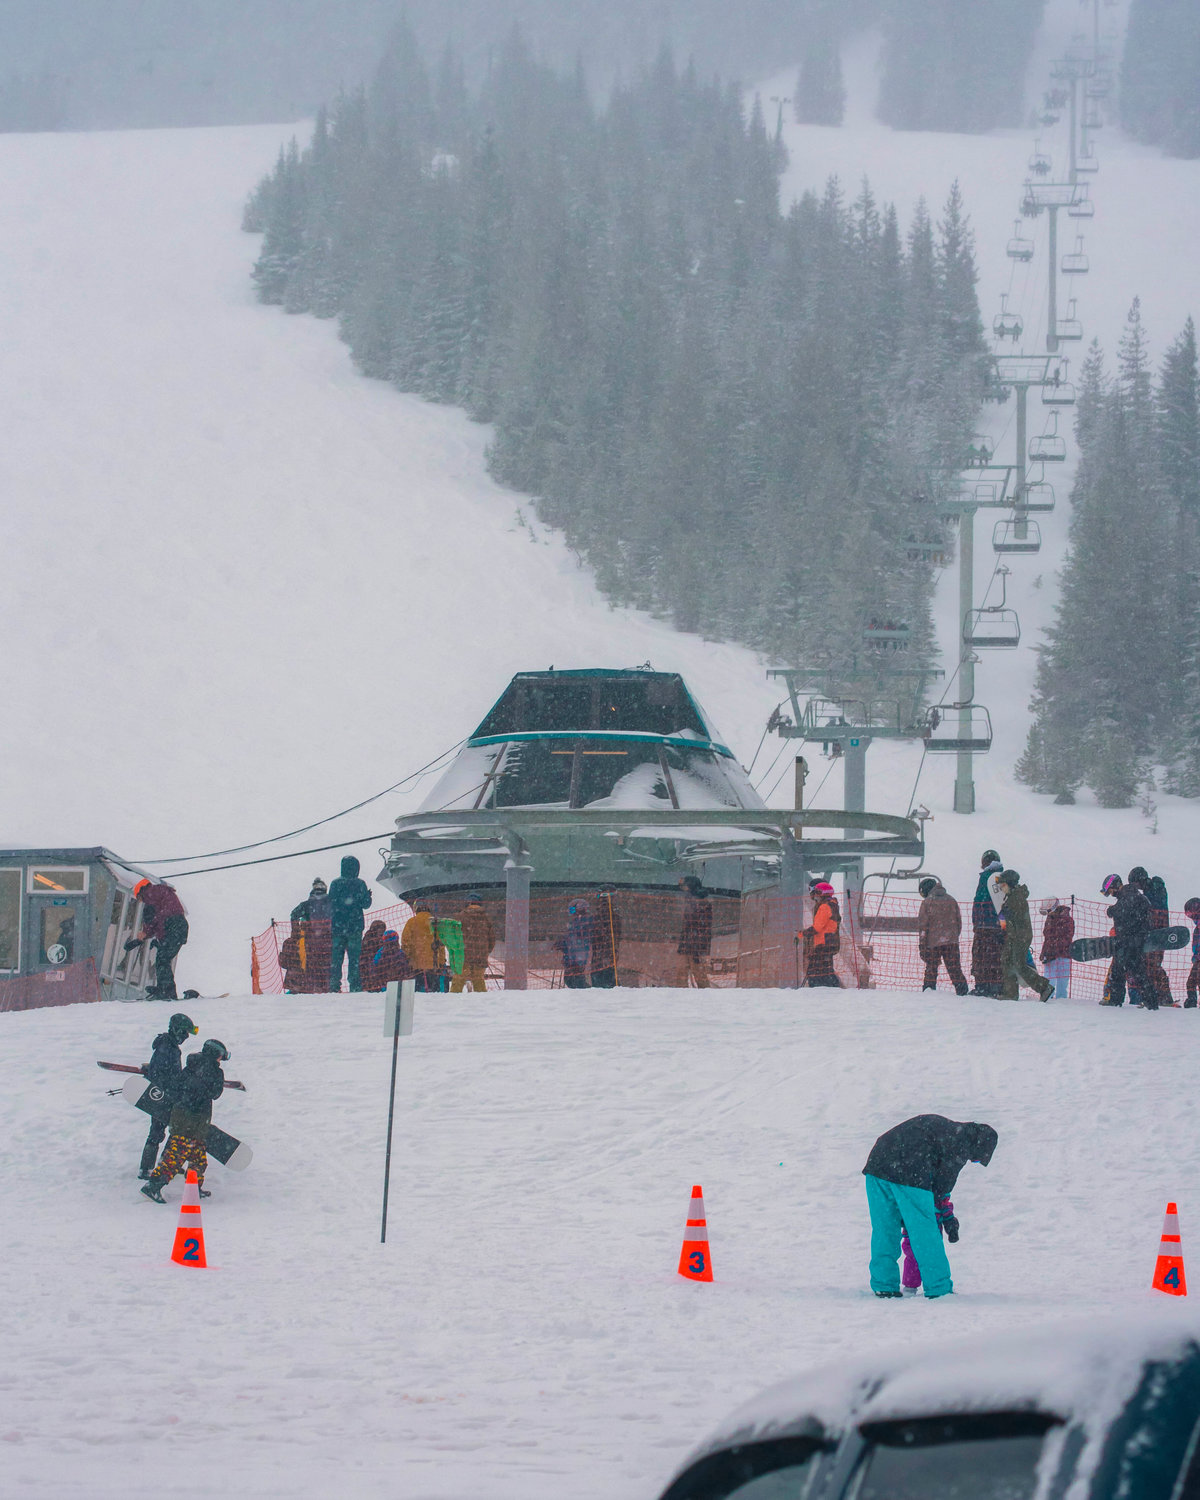 Crowds line up to ride ‘The Great White Express’ at the White Pass Ski Area on Sunday.